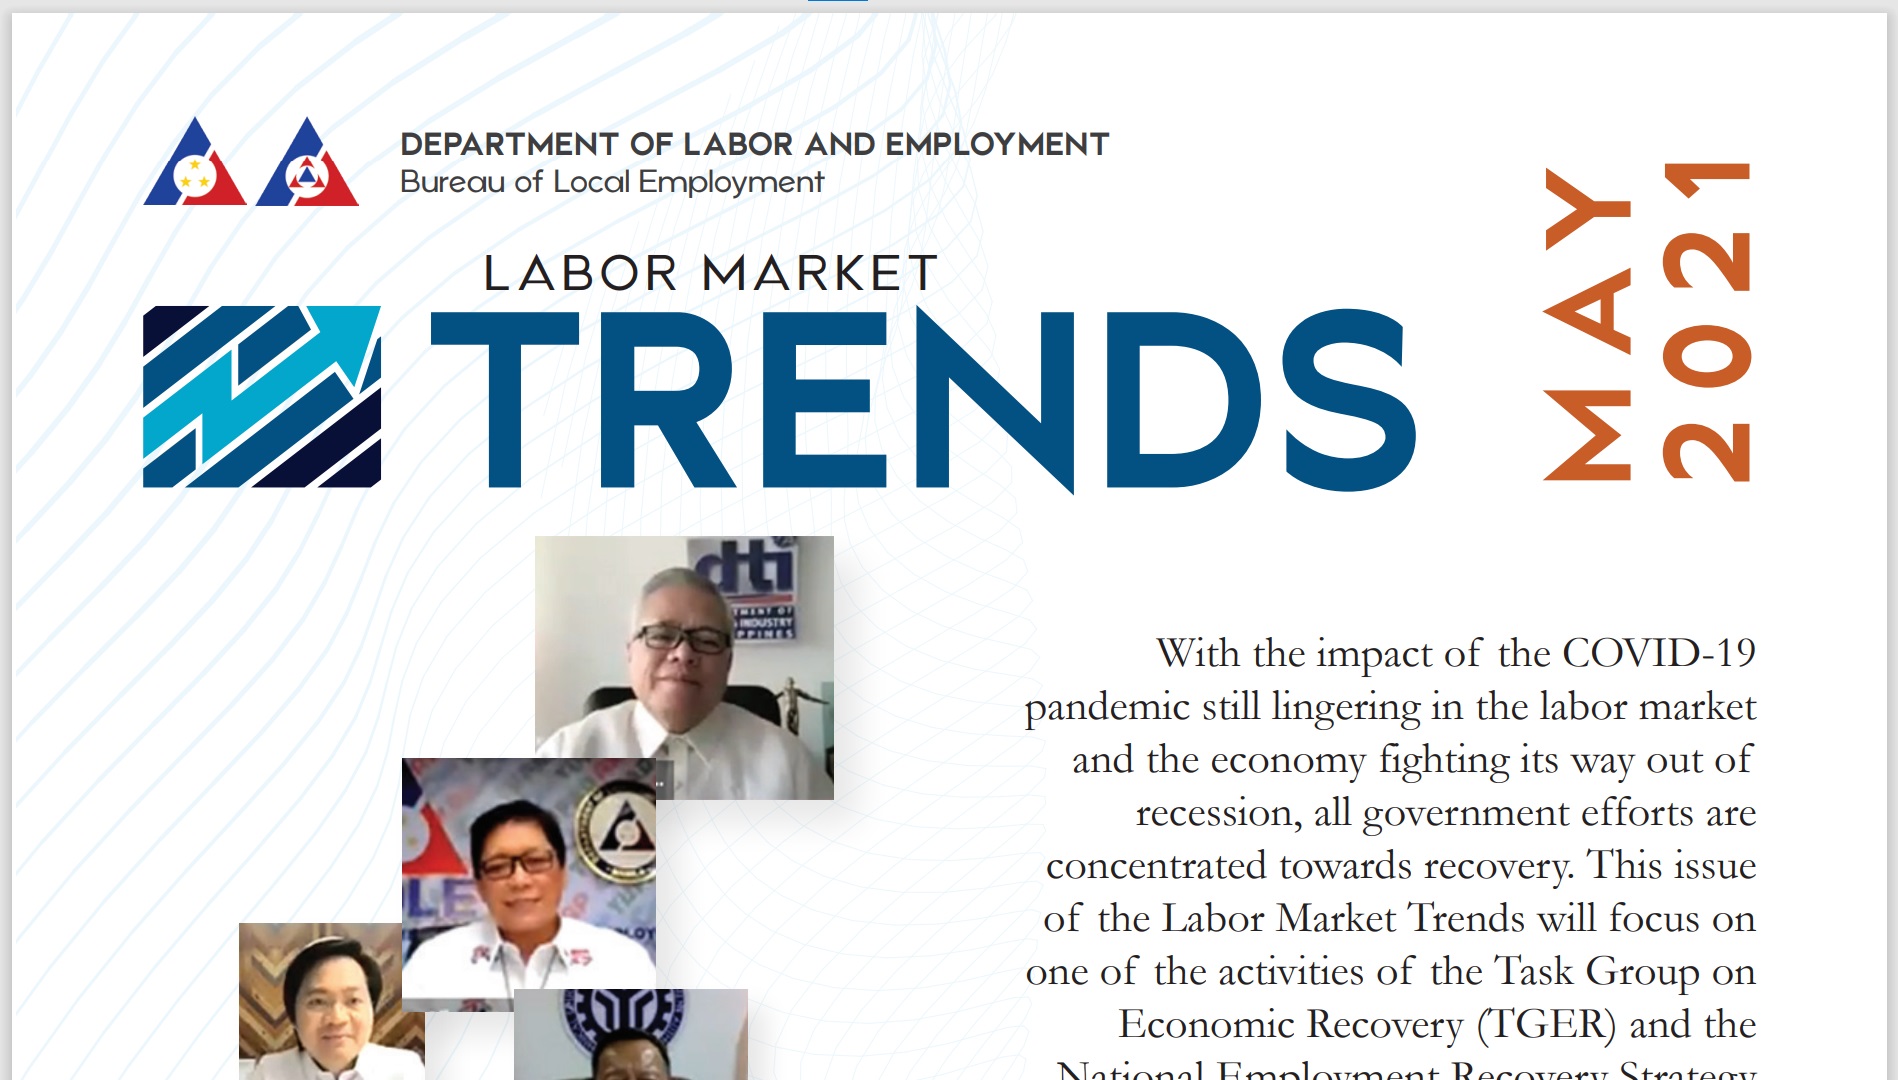 Output of the DOLE Labor Market Trends